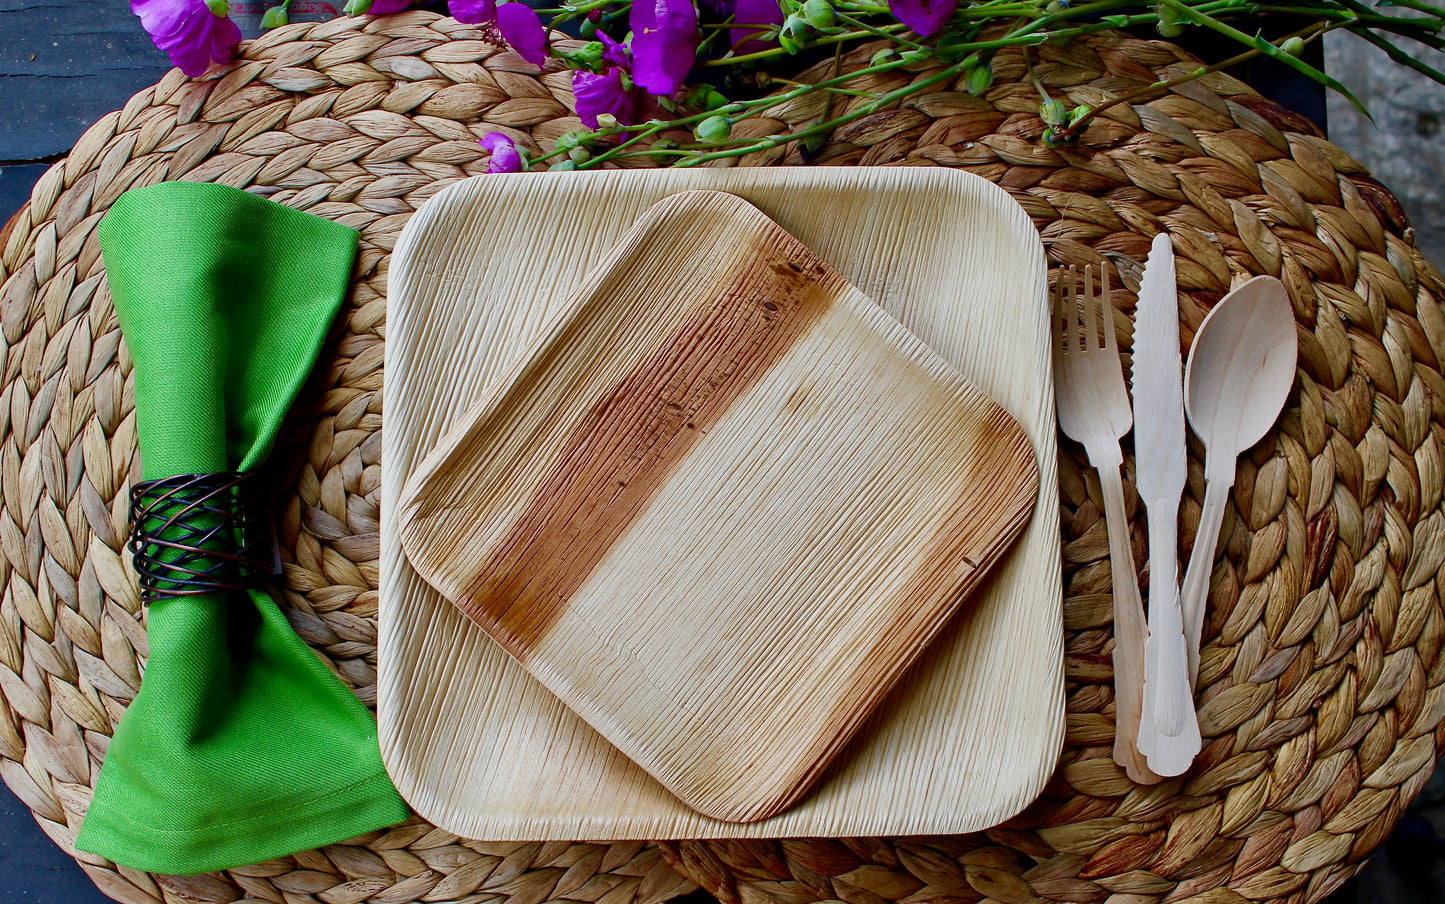 Eco Frindly palm Leaf plates 100 Pic 9.5" Square  Biodegrable - disposable - composable